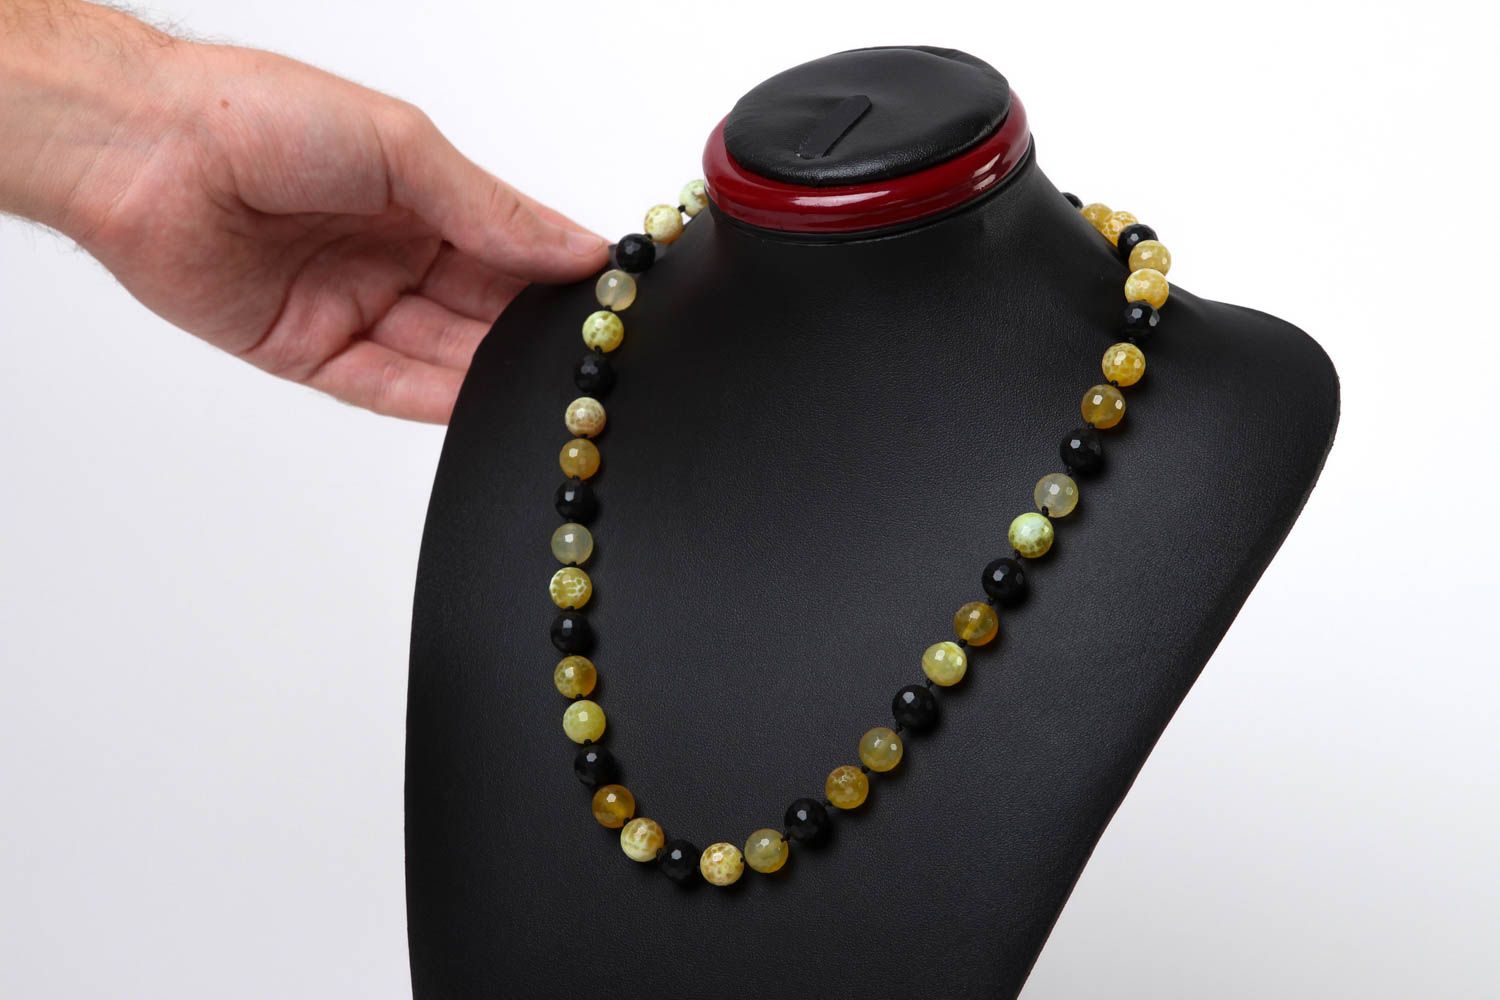 Bead necklace gemstone jewelry handmade necklace fashion accessories for women photo 5